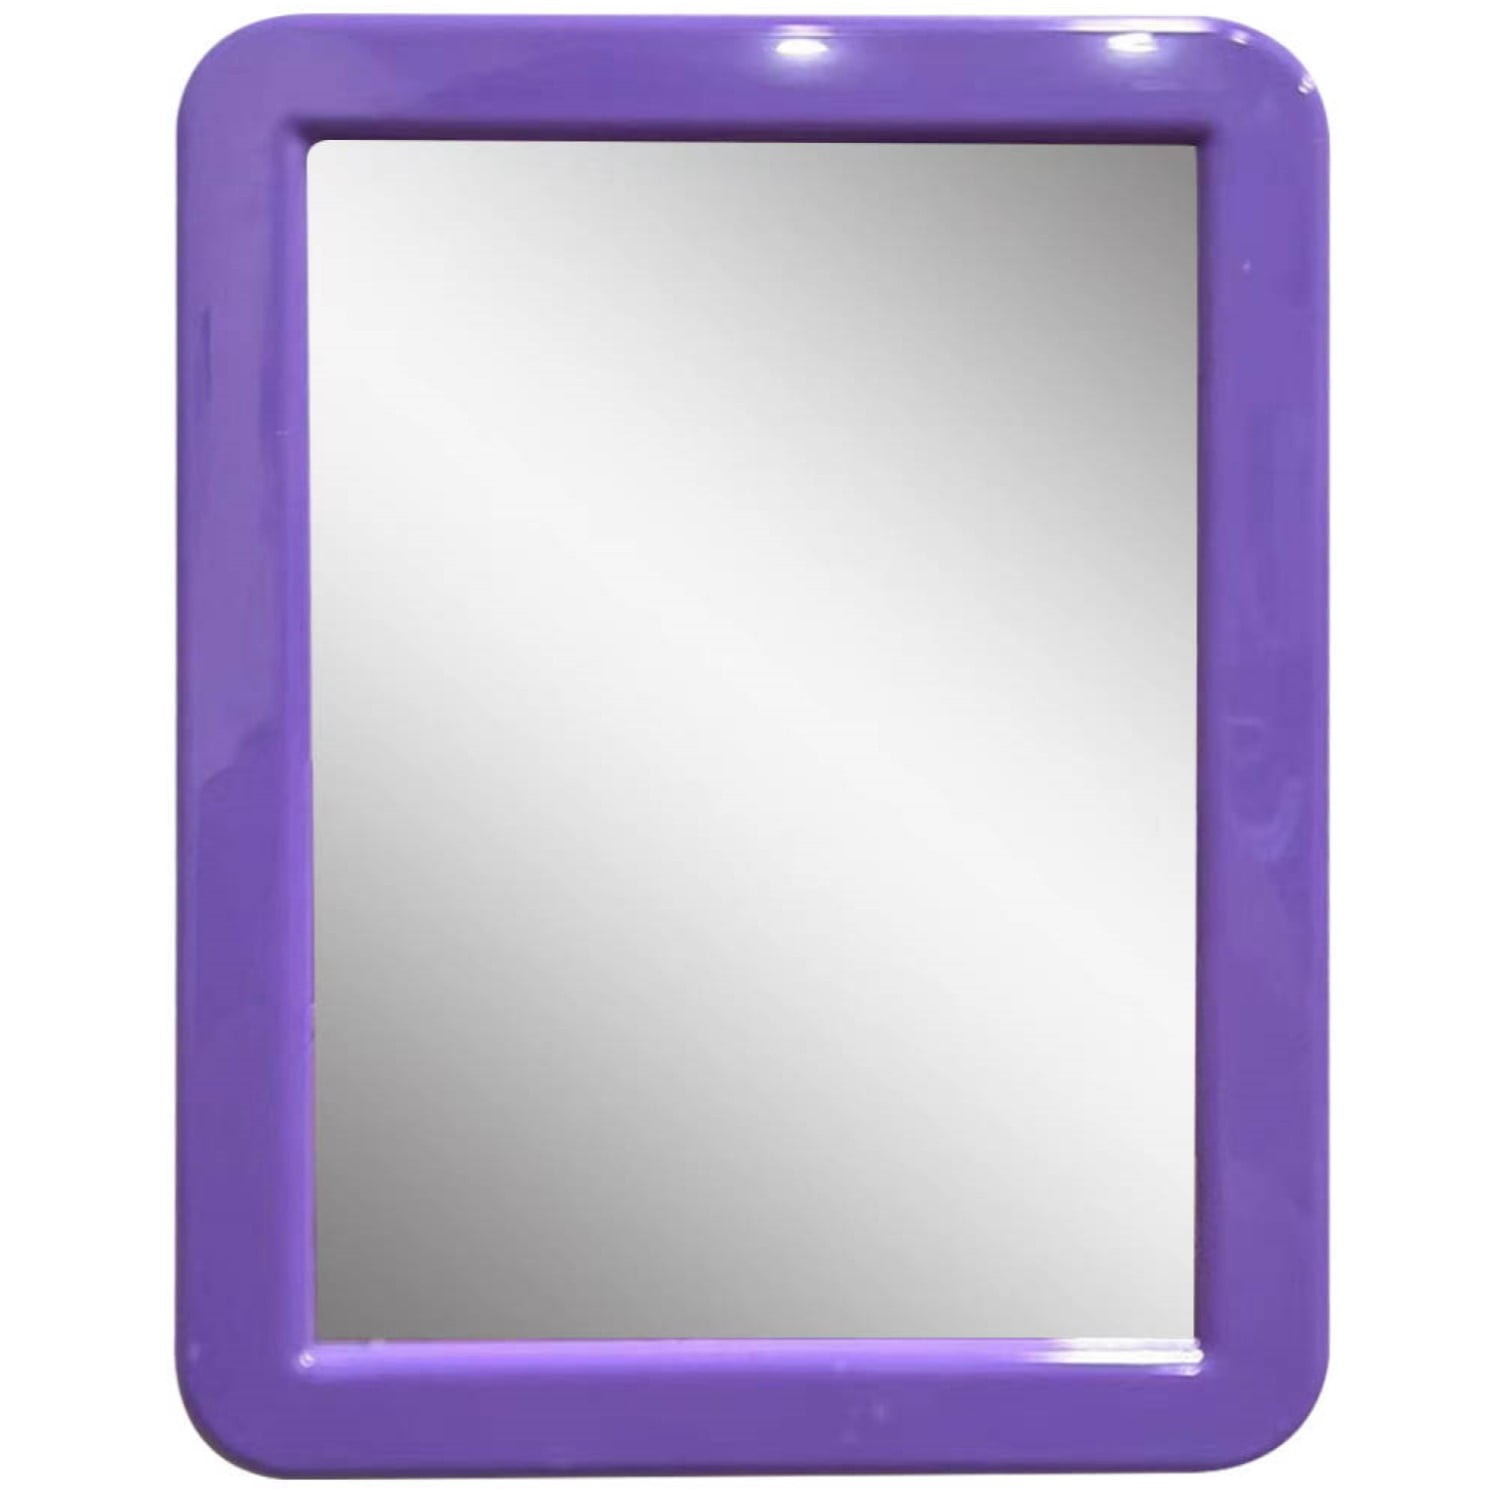 CEREM Magnetic Locker Mirror, Purple 5 x 7 - Real Glass Make-up Mirror -  Locker Accessory for School, Home, Gym, Office